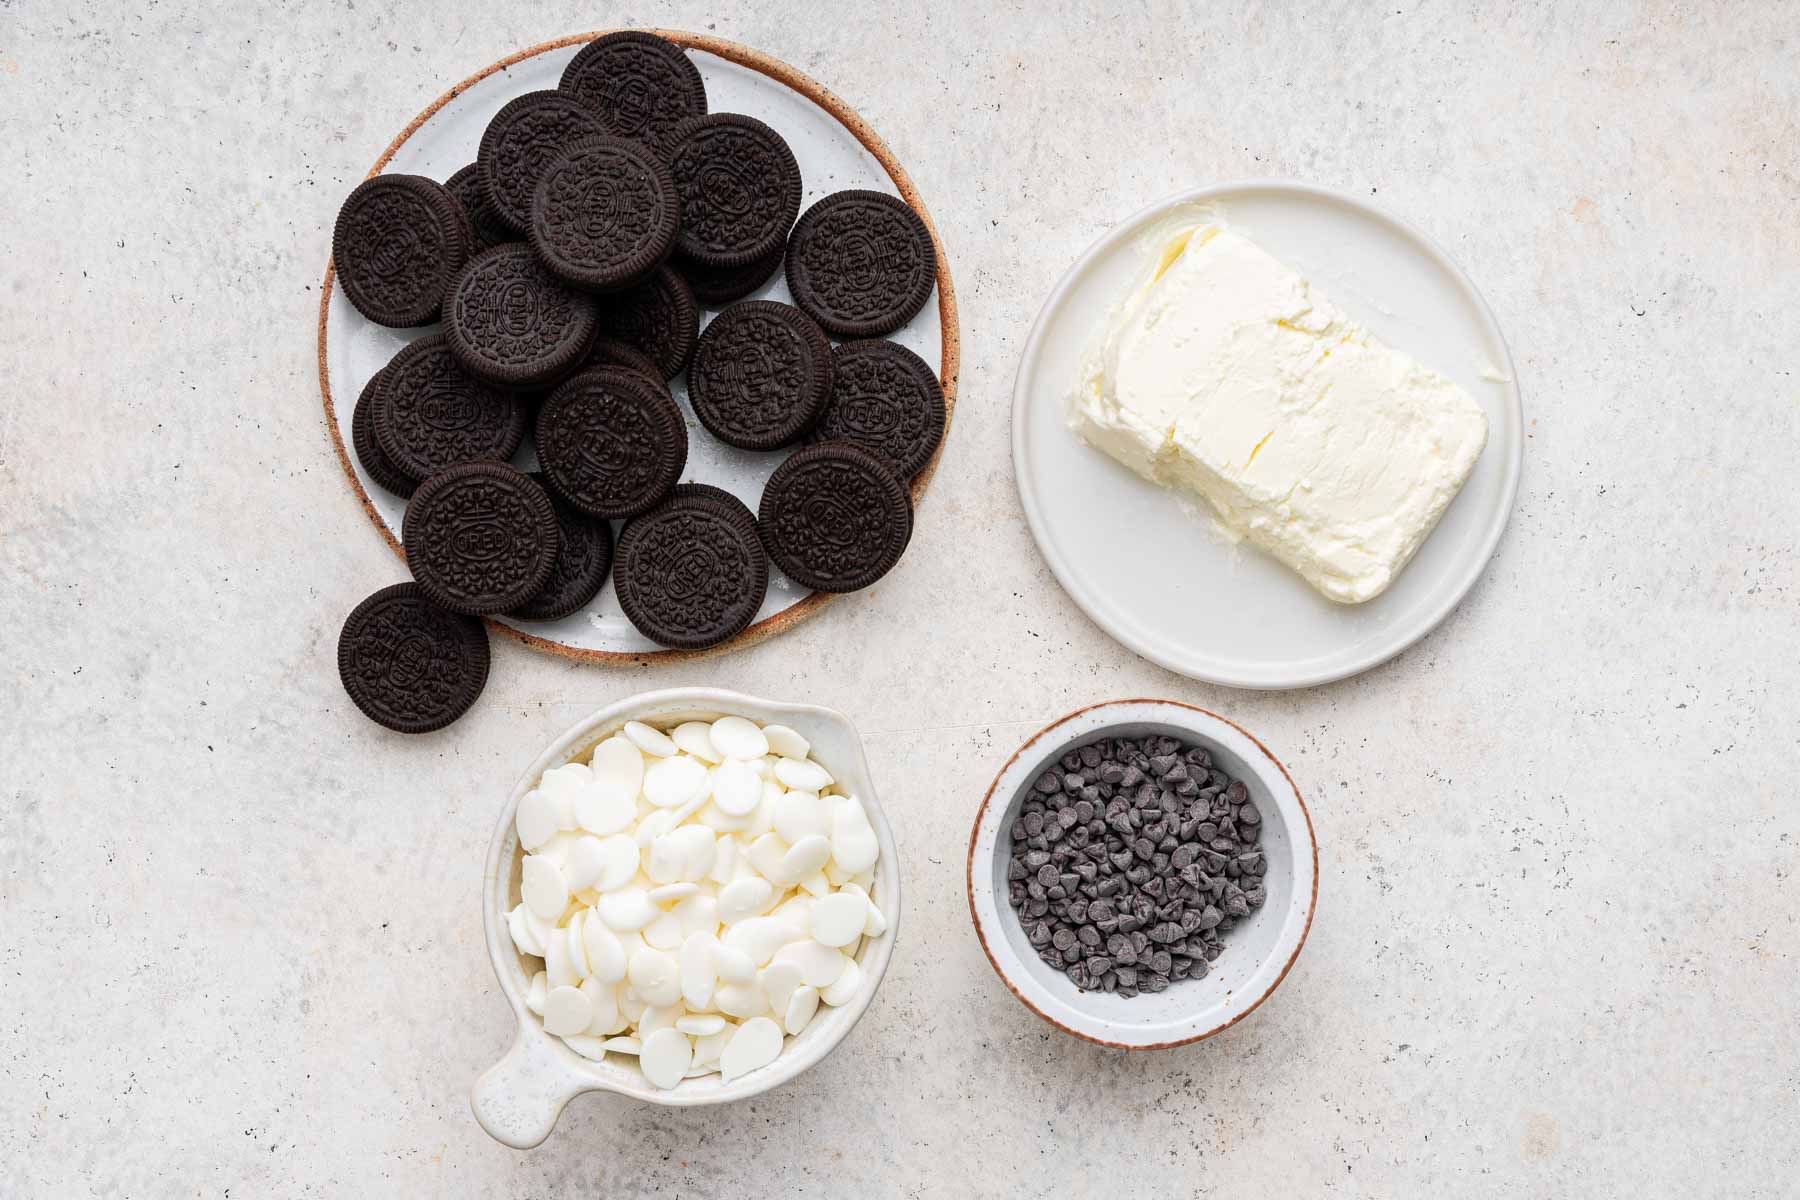 Plate of oreos, white chocolate chips, and cream cheese on grey counter.